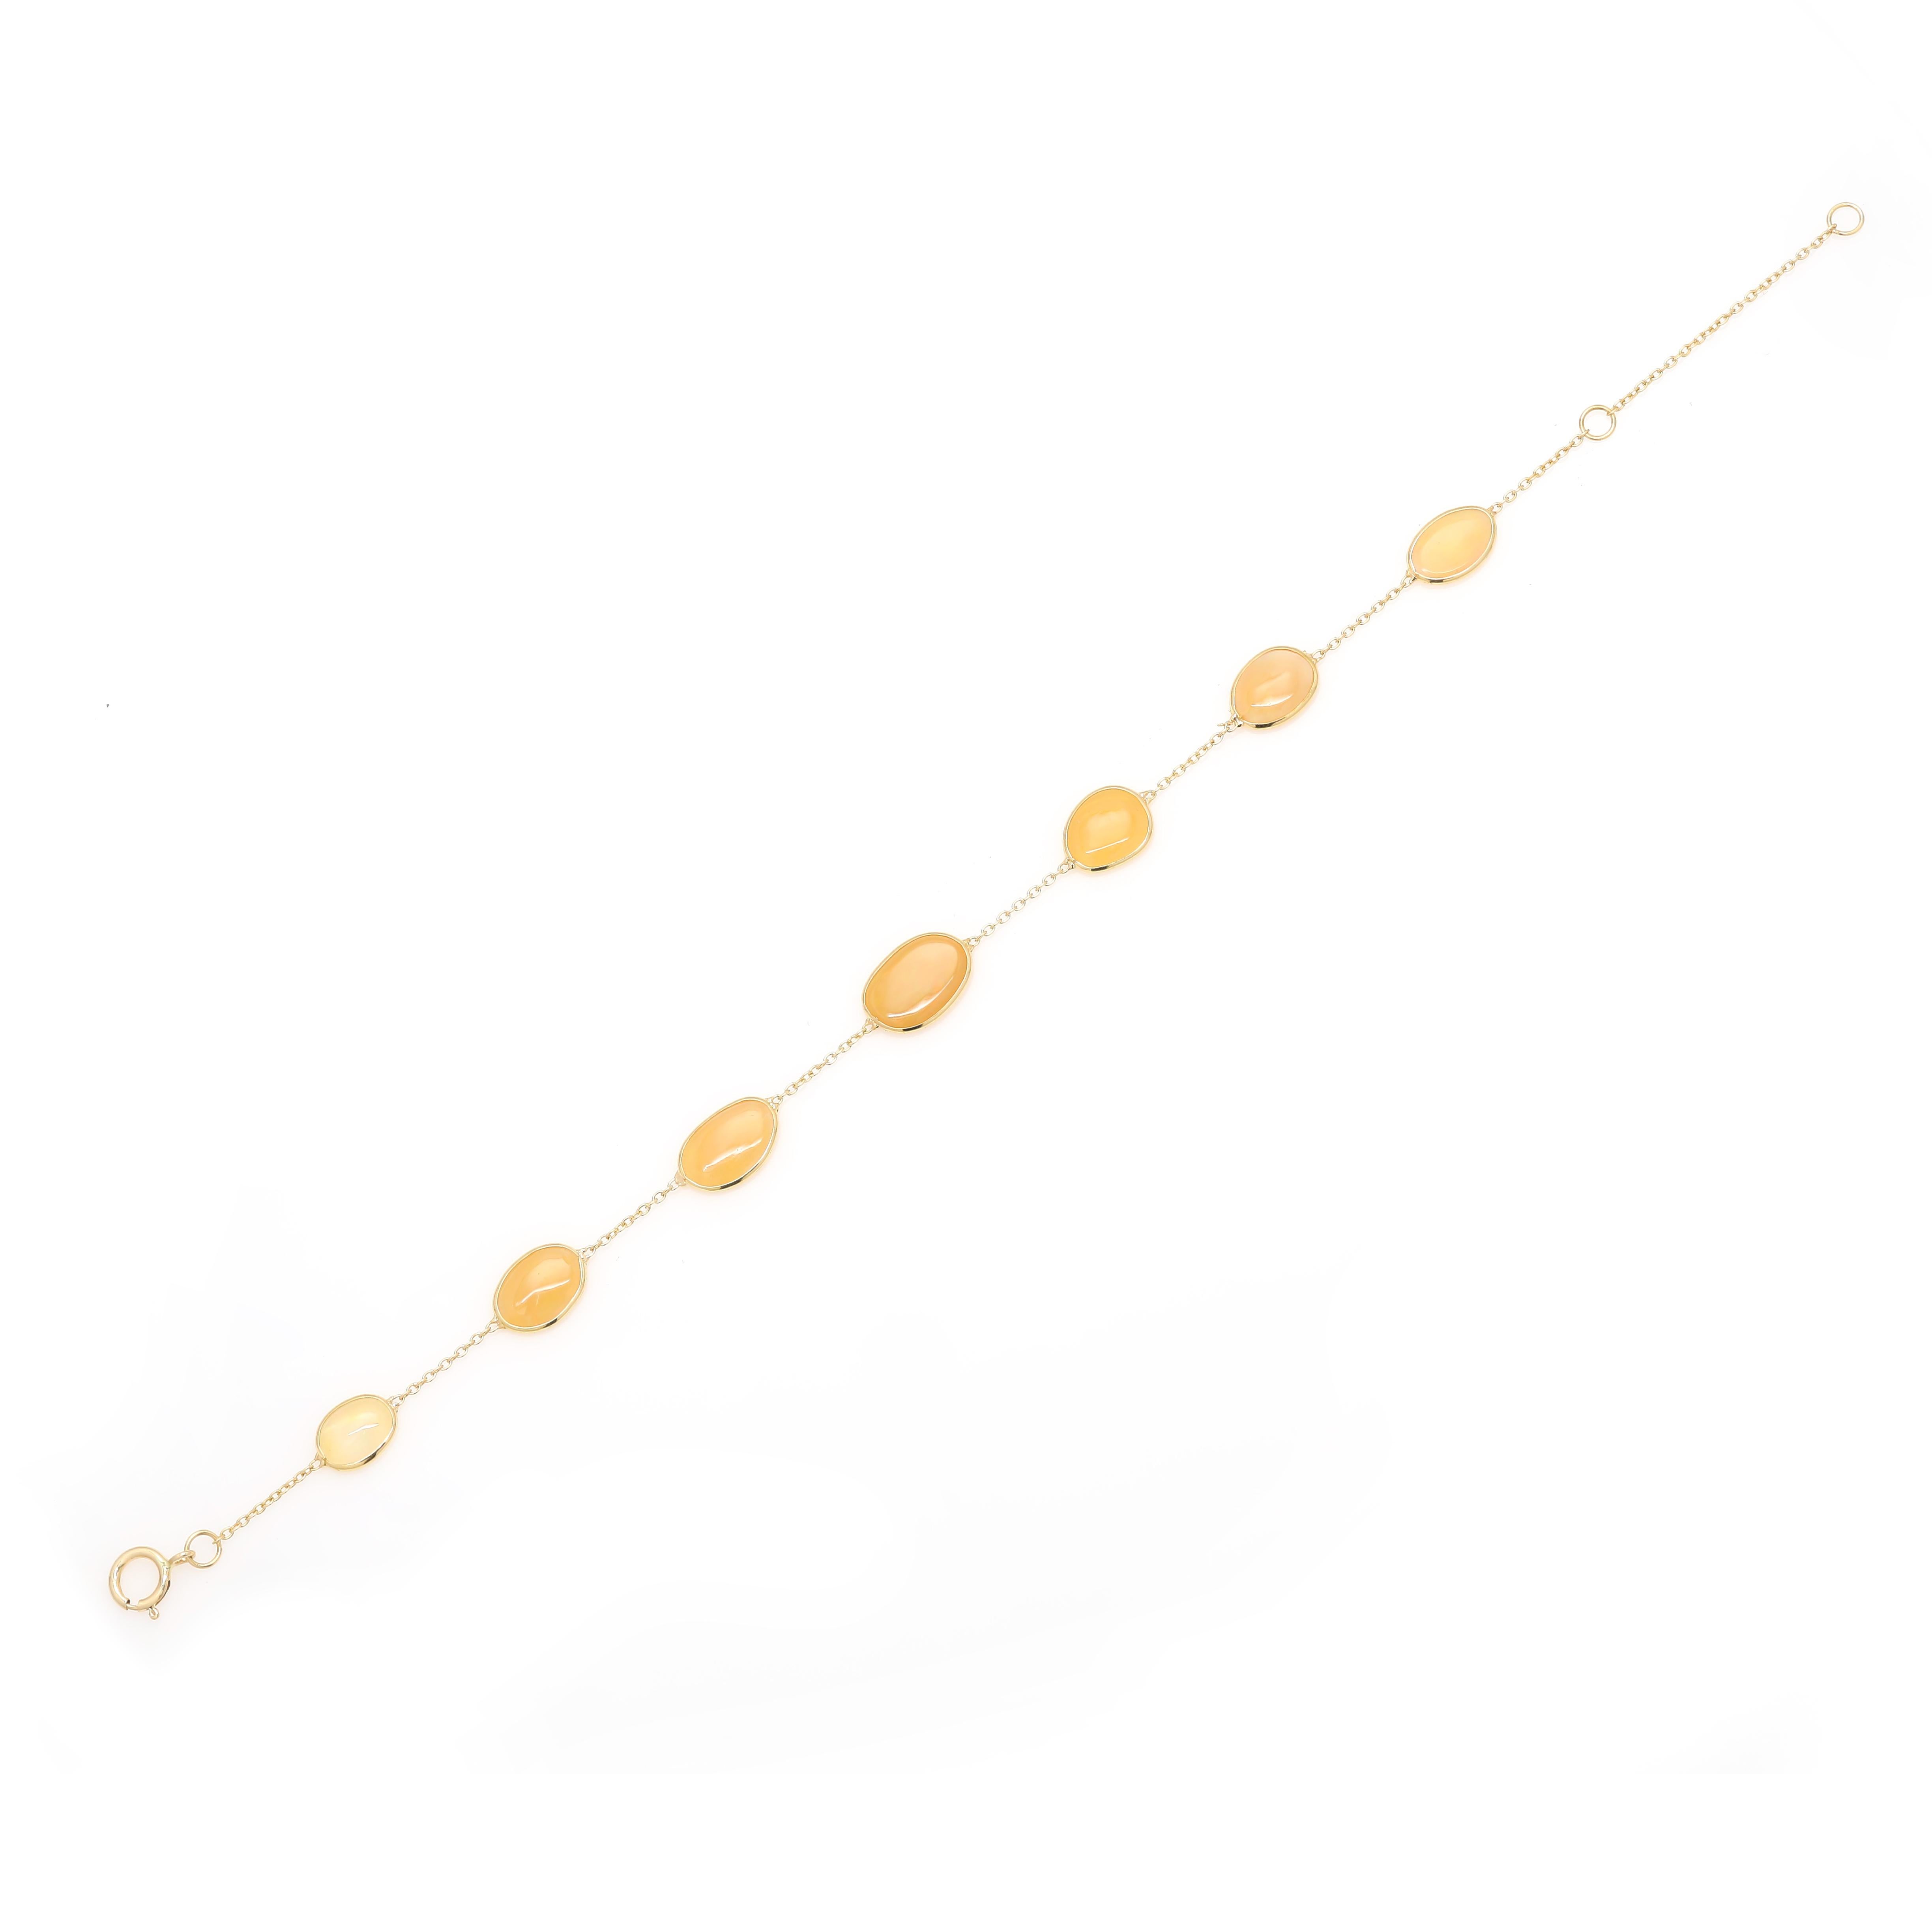 This Beautiful Opal Station Chain Bracelet in 18K gold showcases 7 sparkling natural opal, weighing 3.5 carat. It measures 6 inches long in length. 
Opal enhances creativity, passion and strength.
Designed with uneven cut opal linked with chain to